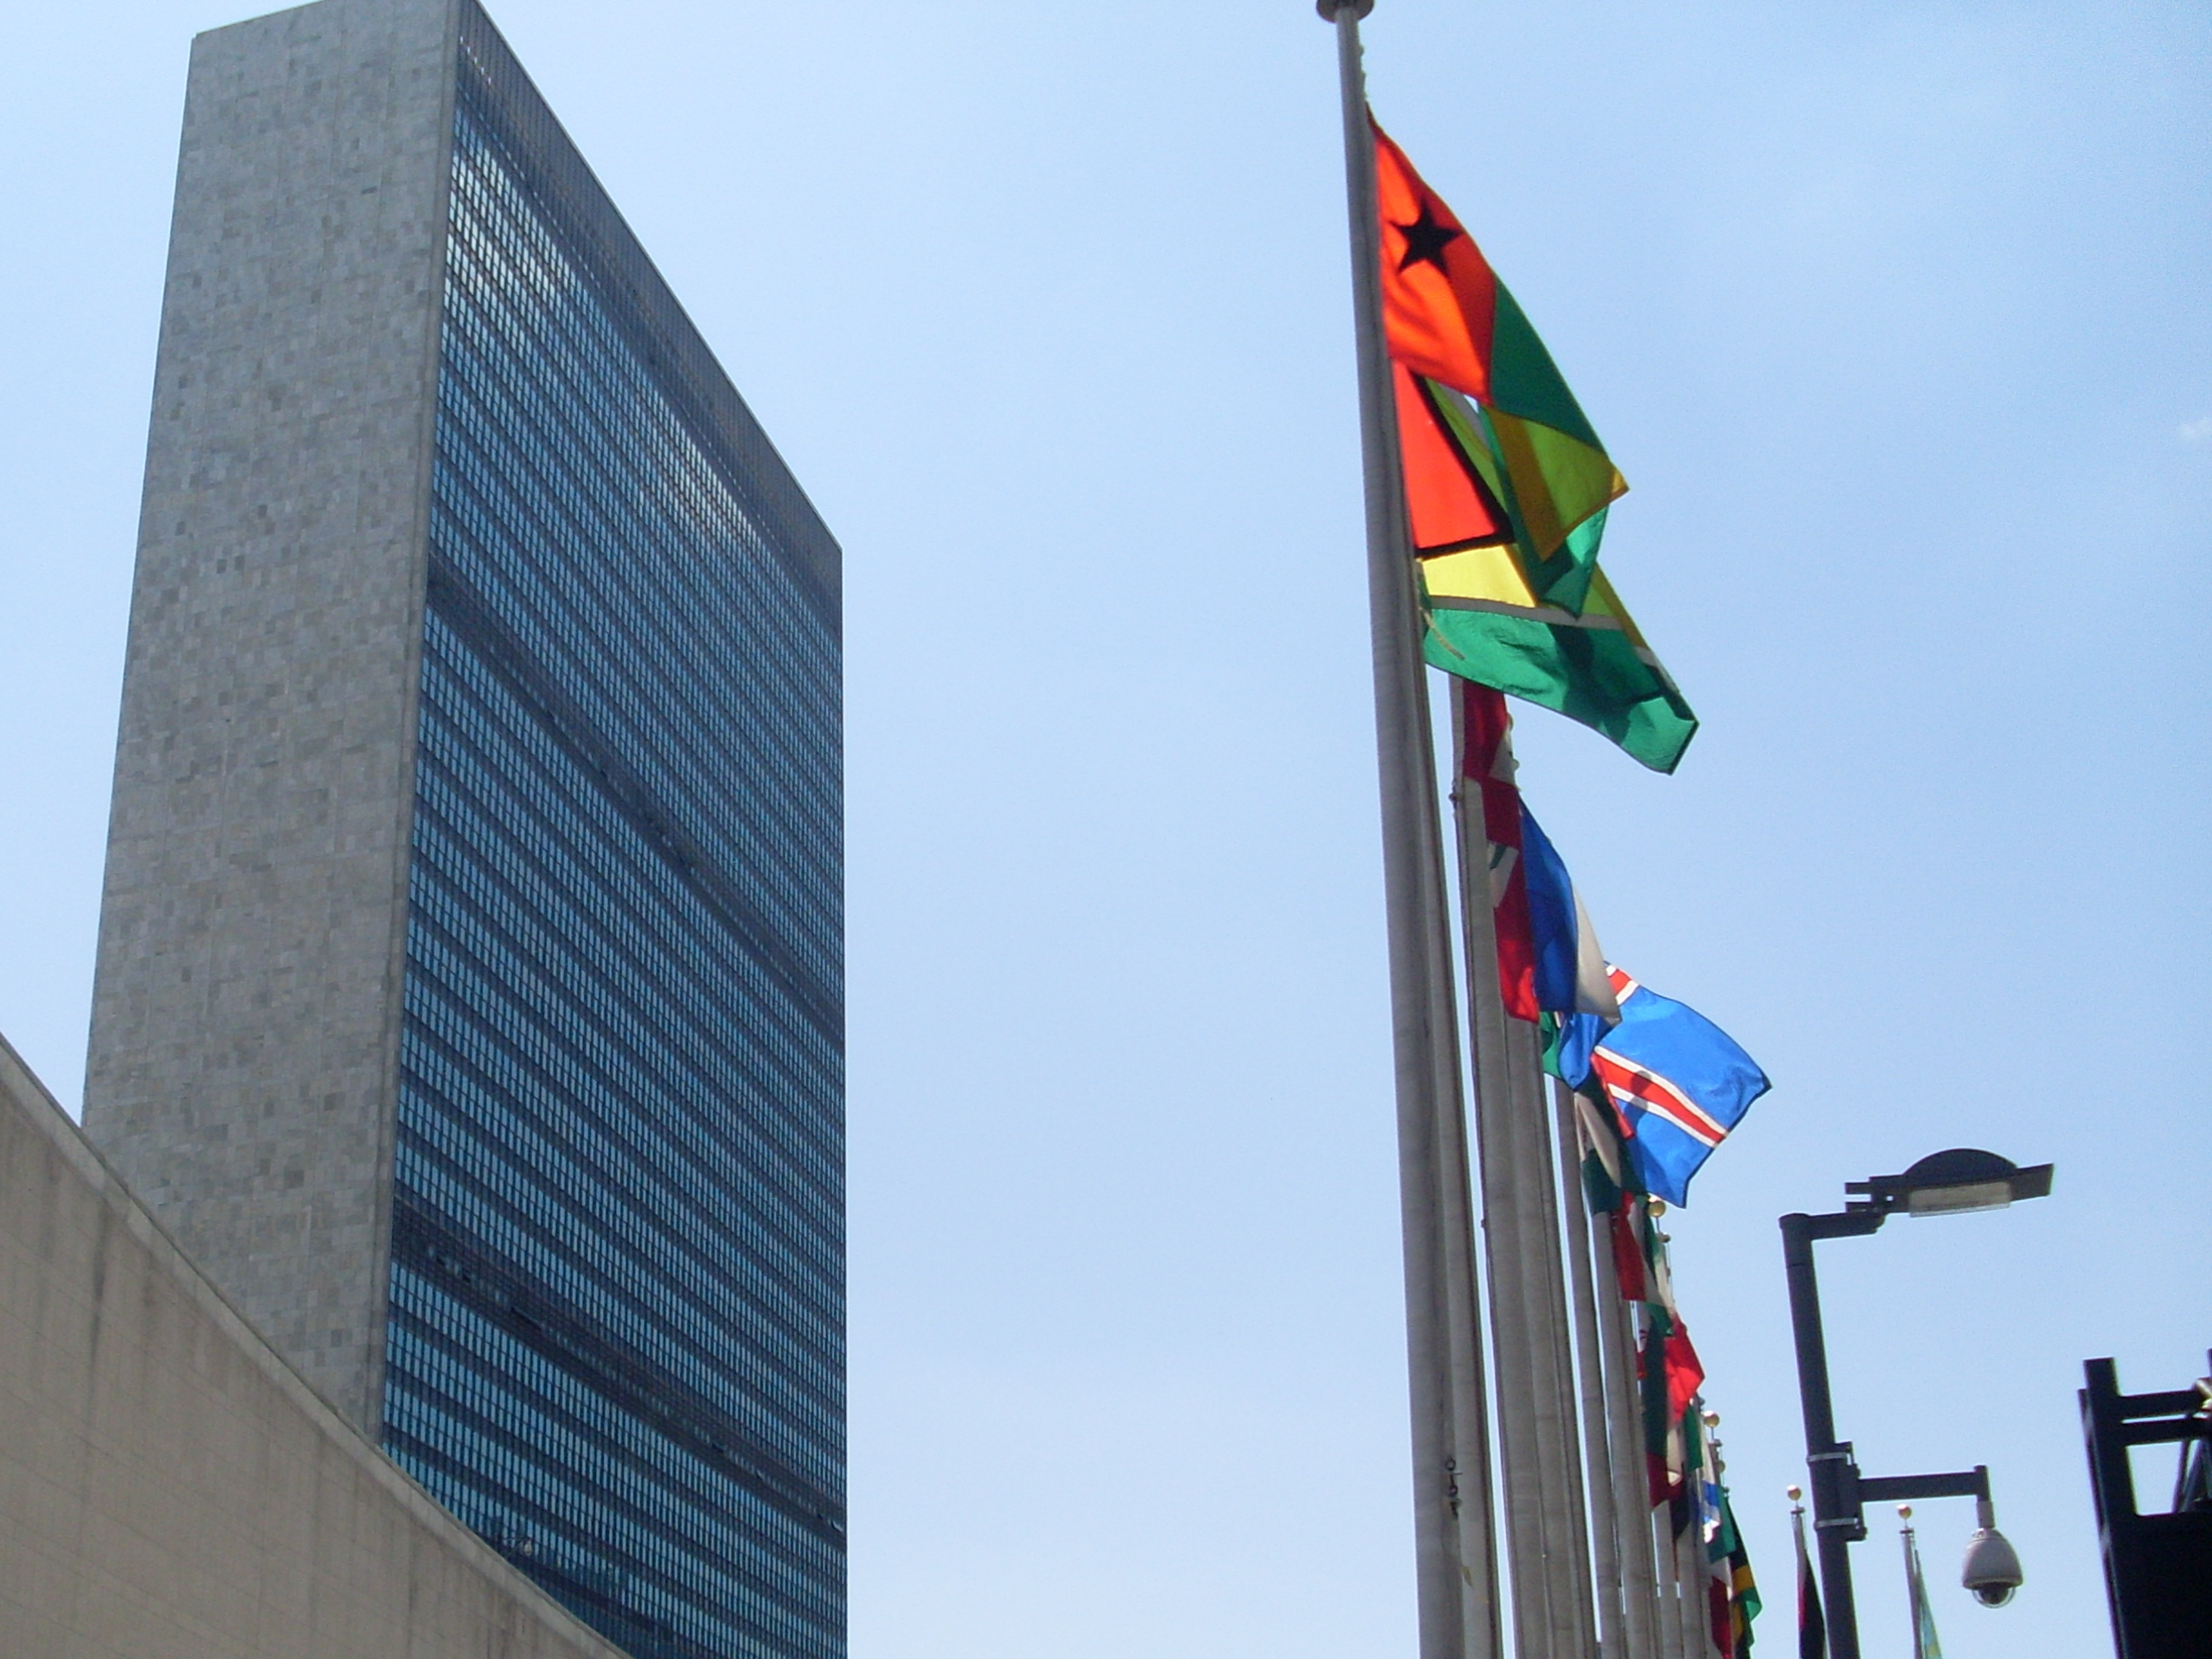 United Nations headquarters, showing the iconic tower and the row of flags